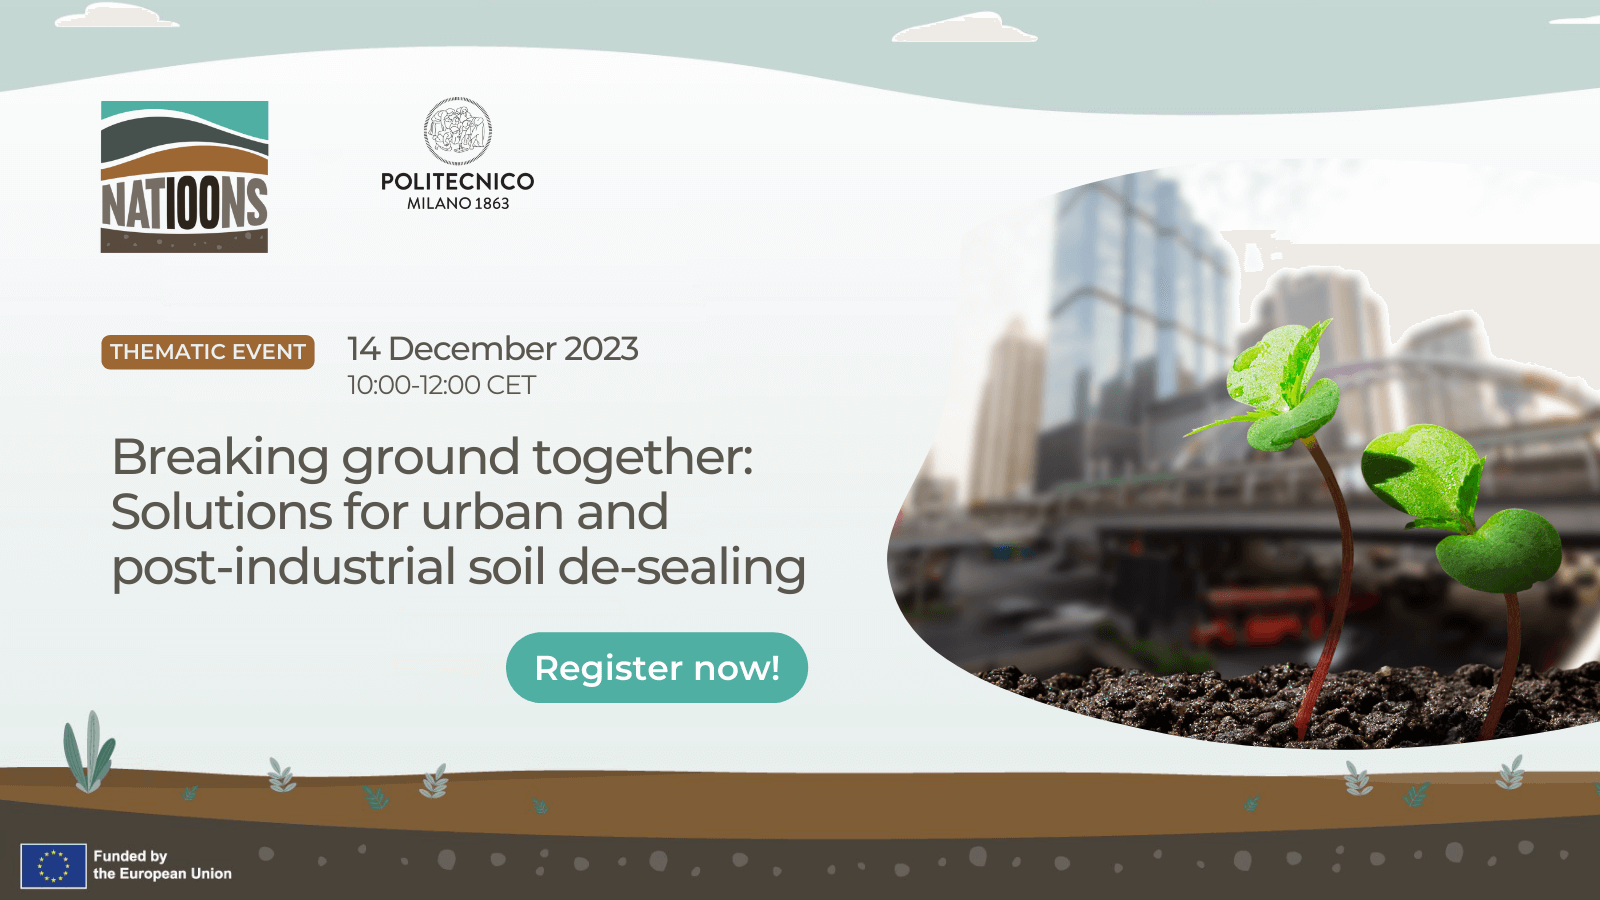 NATI00NS soil thematic events: Solutions for urban and post-industrial soil de-sealing